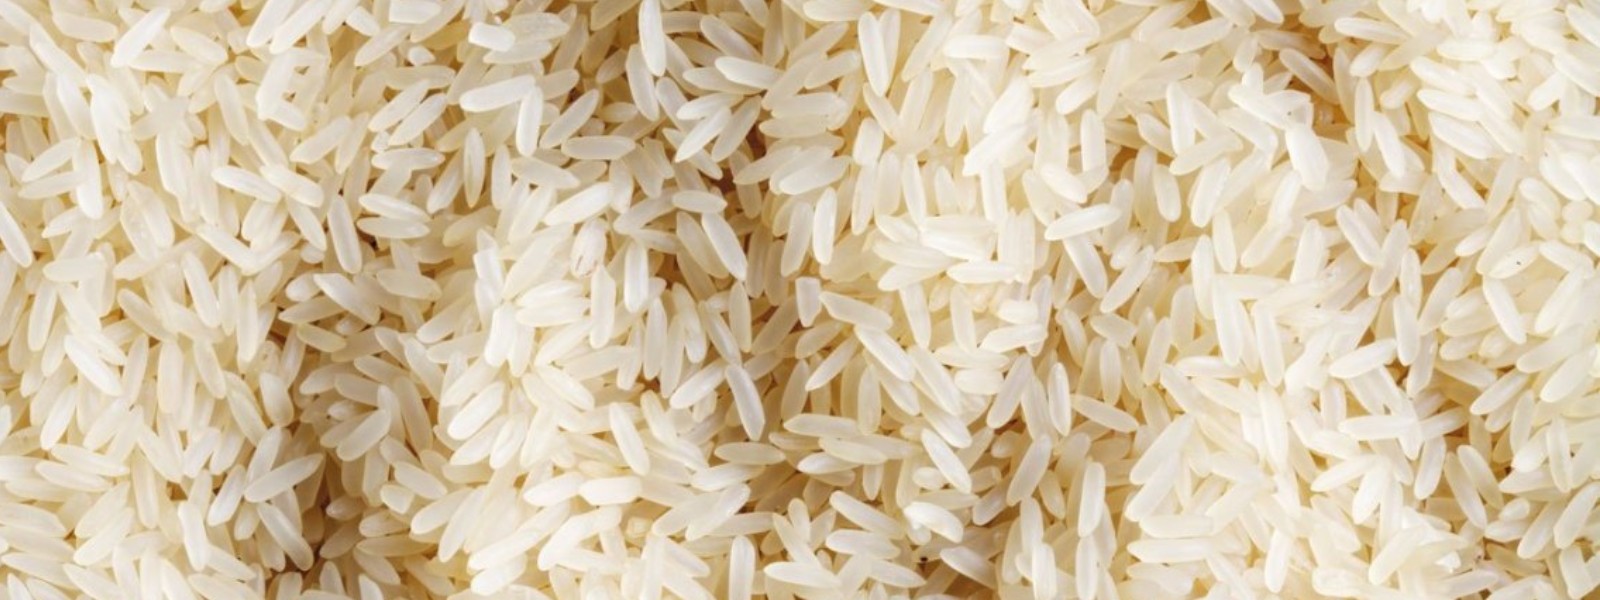 Featured image for "Sri Lanka’s Cabinet of Ministers approved to import of 200,000 MT of Nadu Rice and 100,000 MT of GR 11 short Grain Rice as a substitute for Samba Rice."